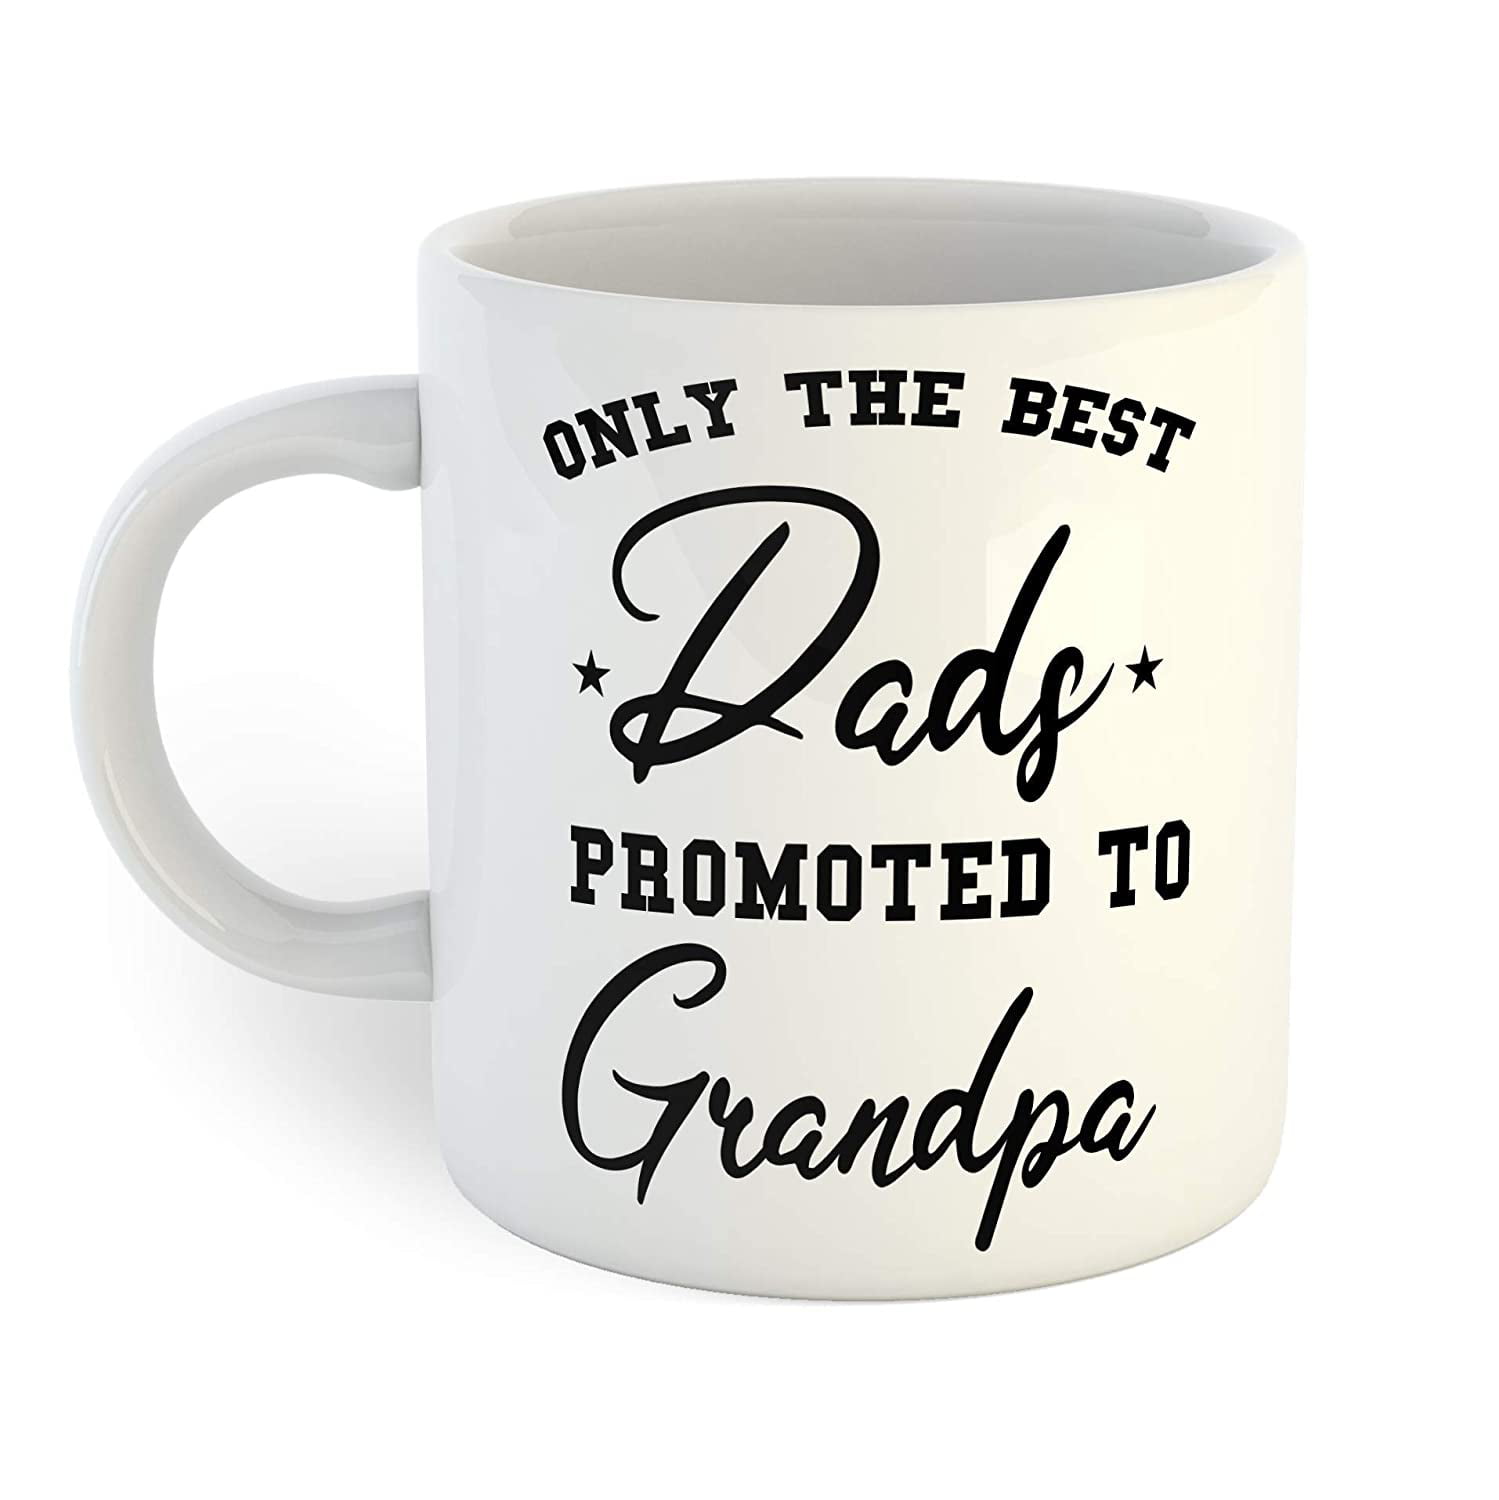 ONLY THE BEST DADS GET PROMOTED TO GRANDAD Coffee Tea Mugs Mug Cup Gift Present 